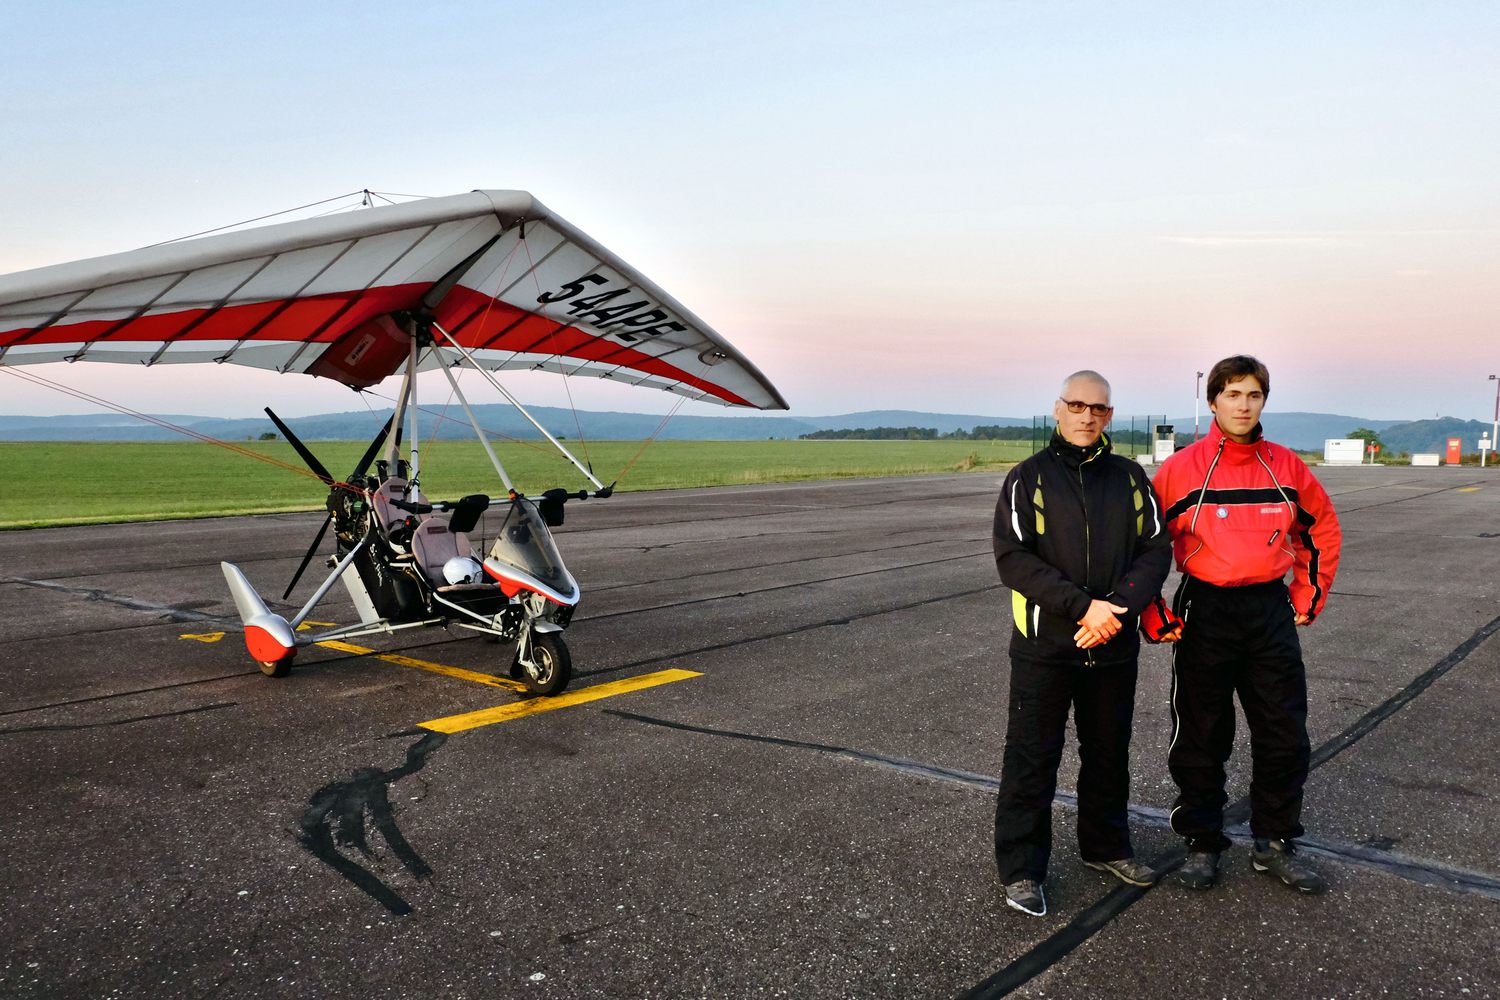 783.9 km Father and son break the Distance World Record in a microlight World Air Sports Federation